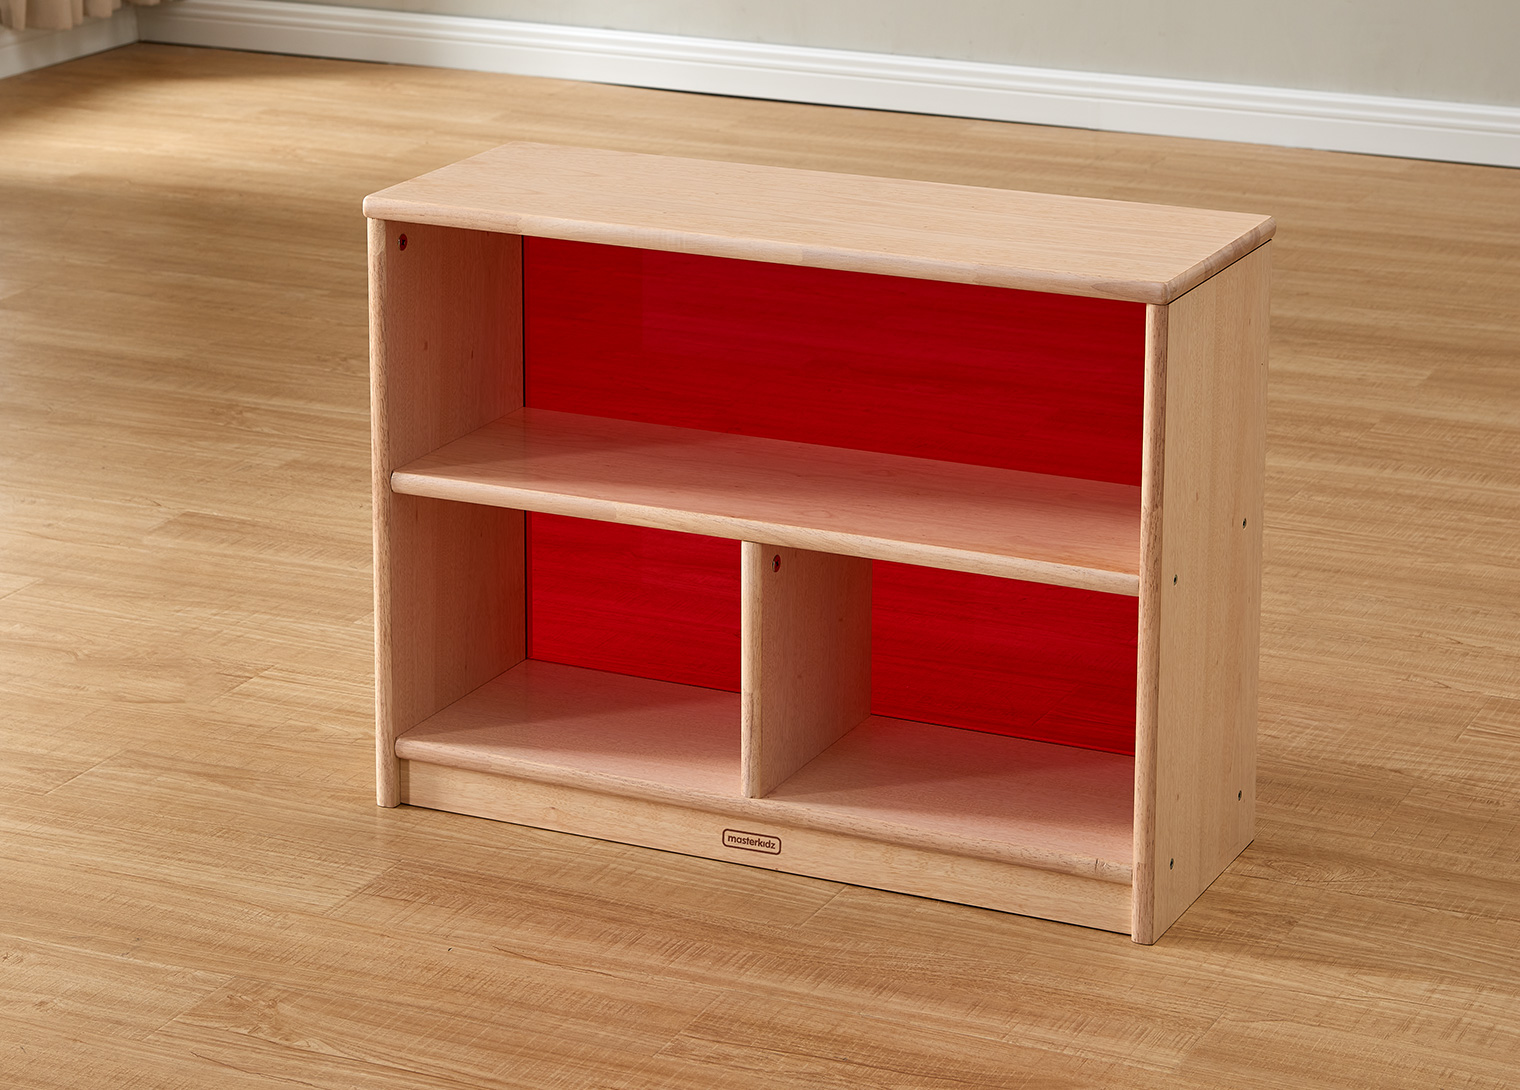 Bern - 609H x 810L Natural Rubber Wood  3-Compartment Shelving Unit - Translucent Red Back